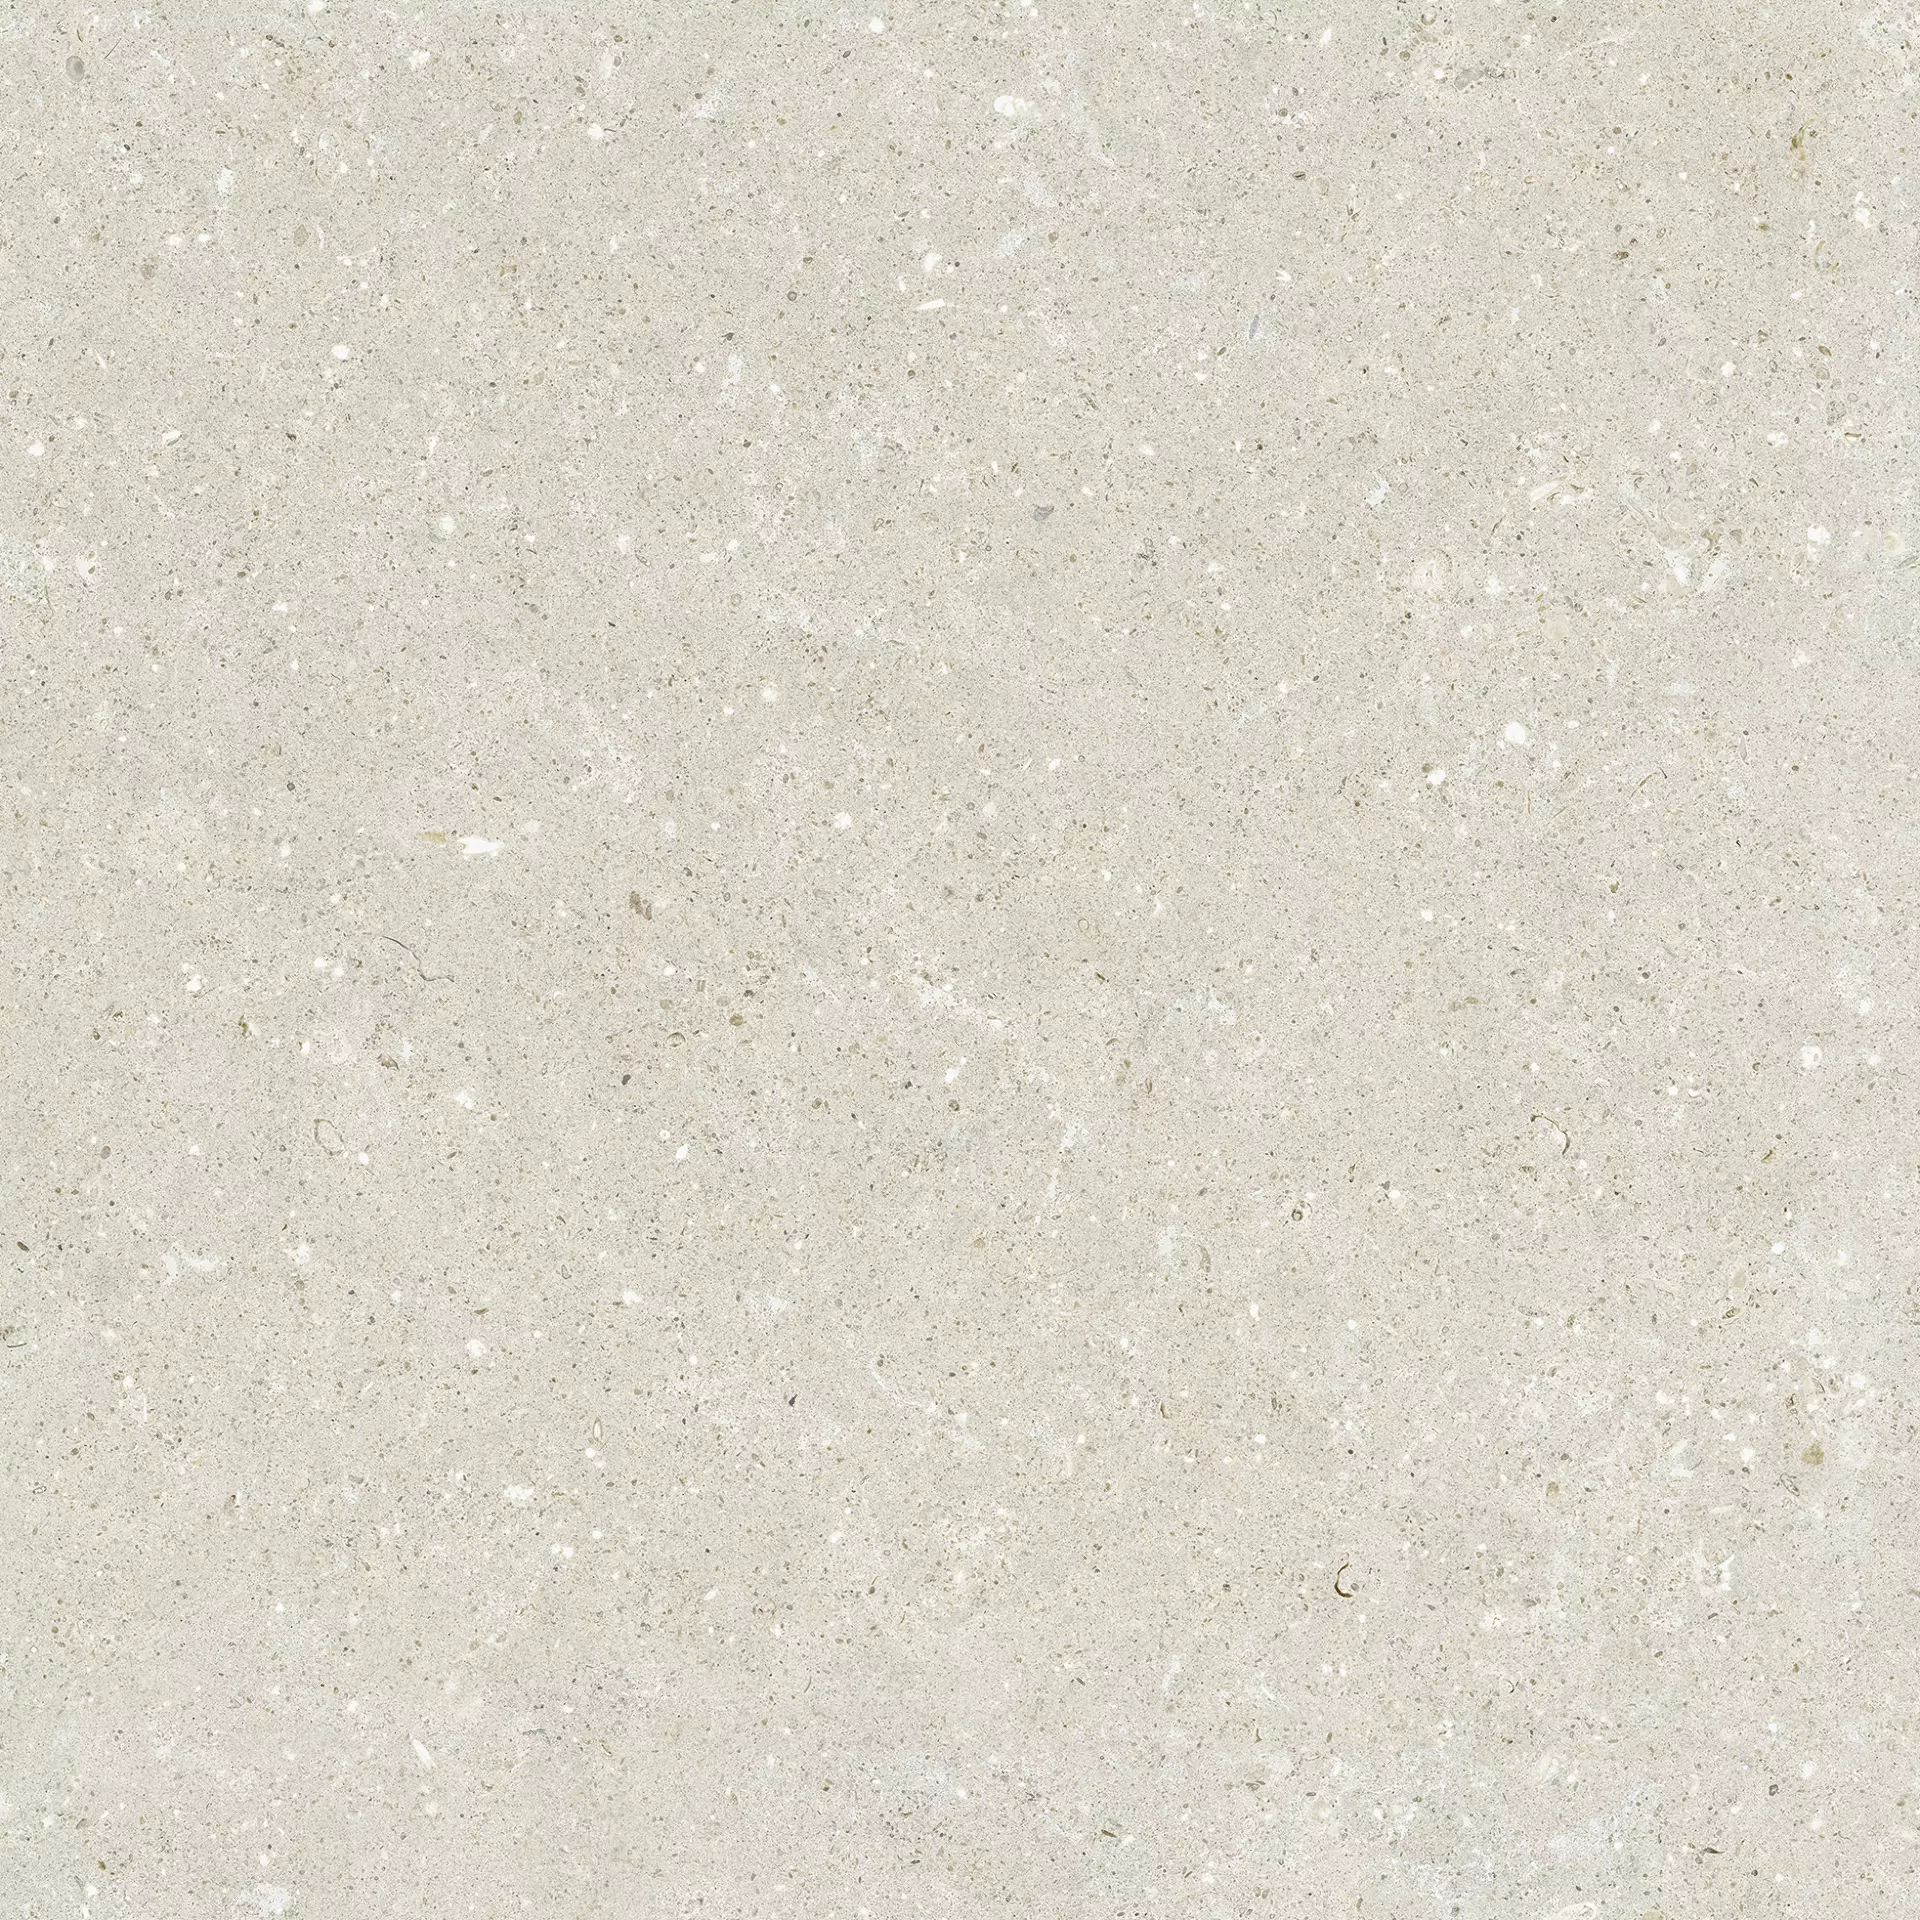 Del Conca Hwd Wild White Hwd Naturale G9WD10R 60x60cm rectified 8,5mm